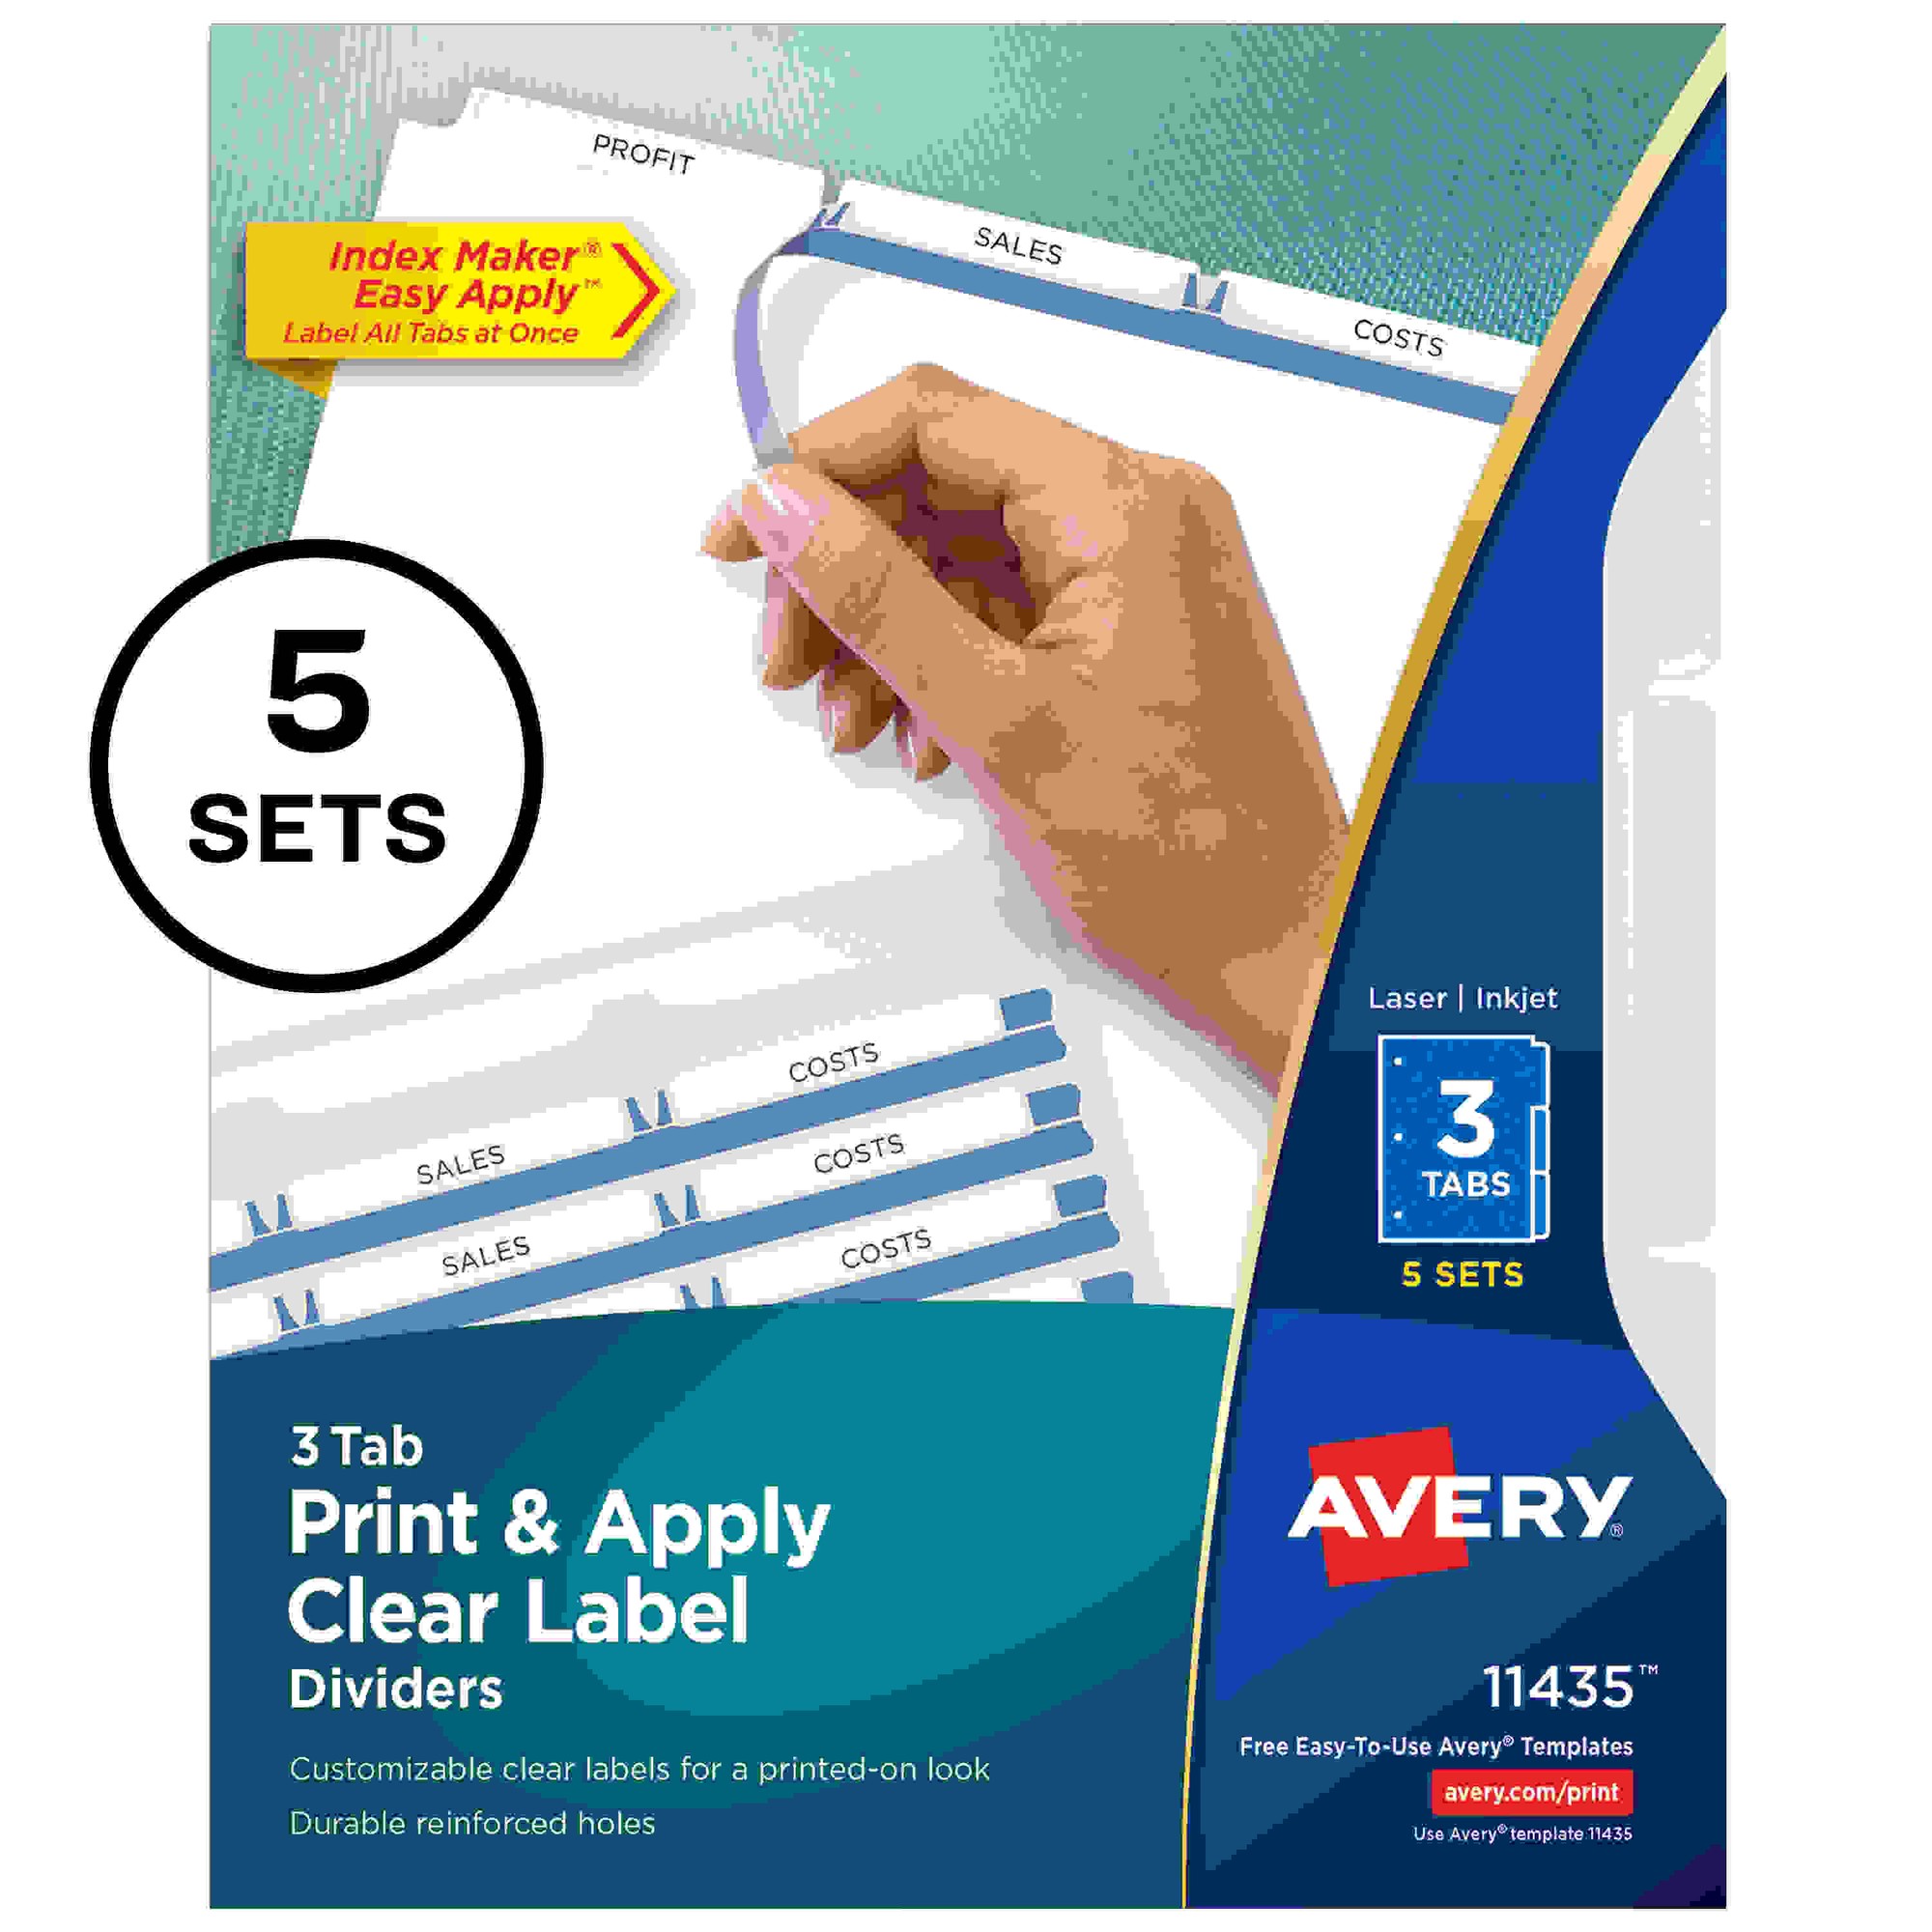 Avery Print & Apply Clear Label Dividers - Index Maker Easy Apply Label Strip - 15 x Divider(s) - 3 Blank Tab(s) - 3 Tab(s)